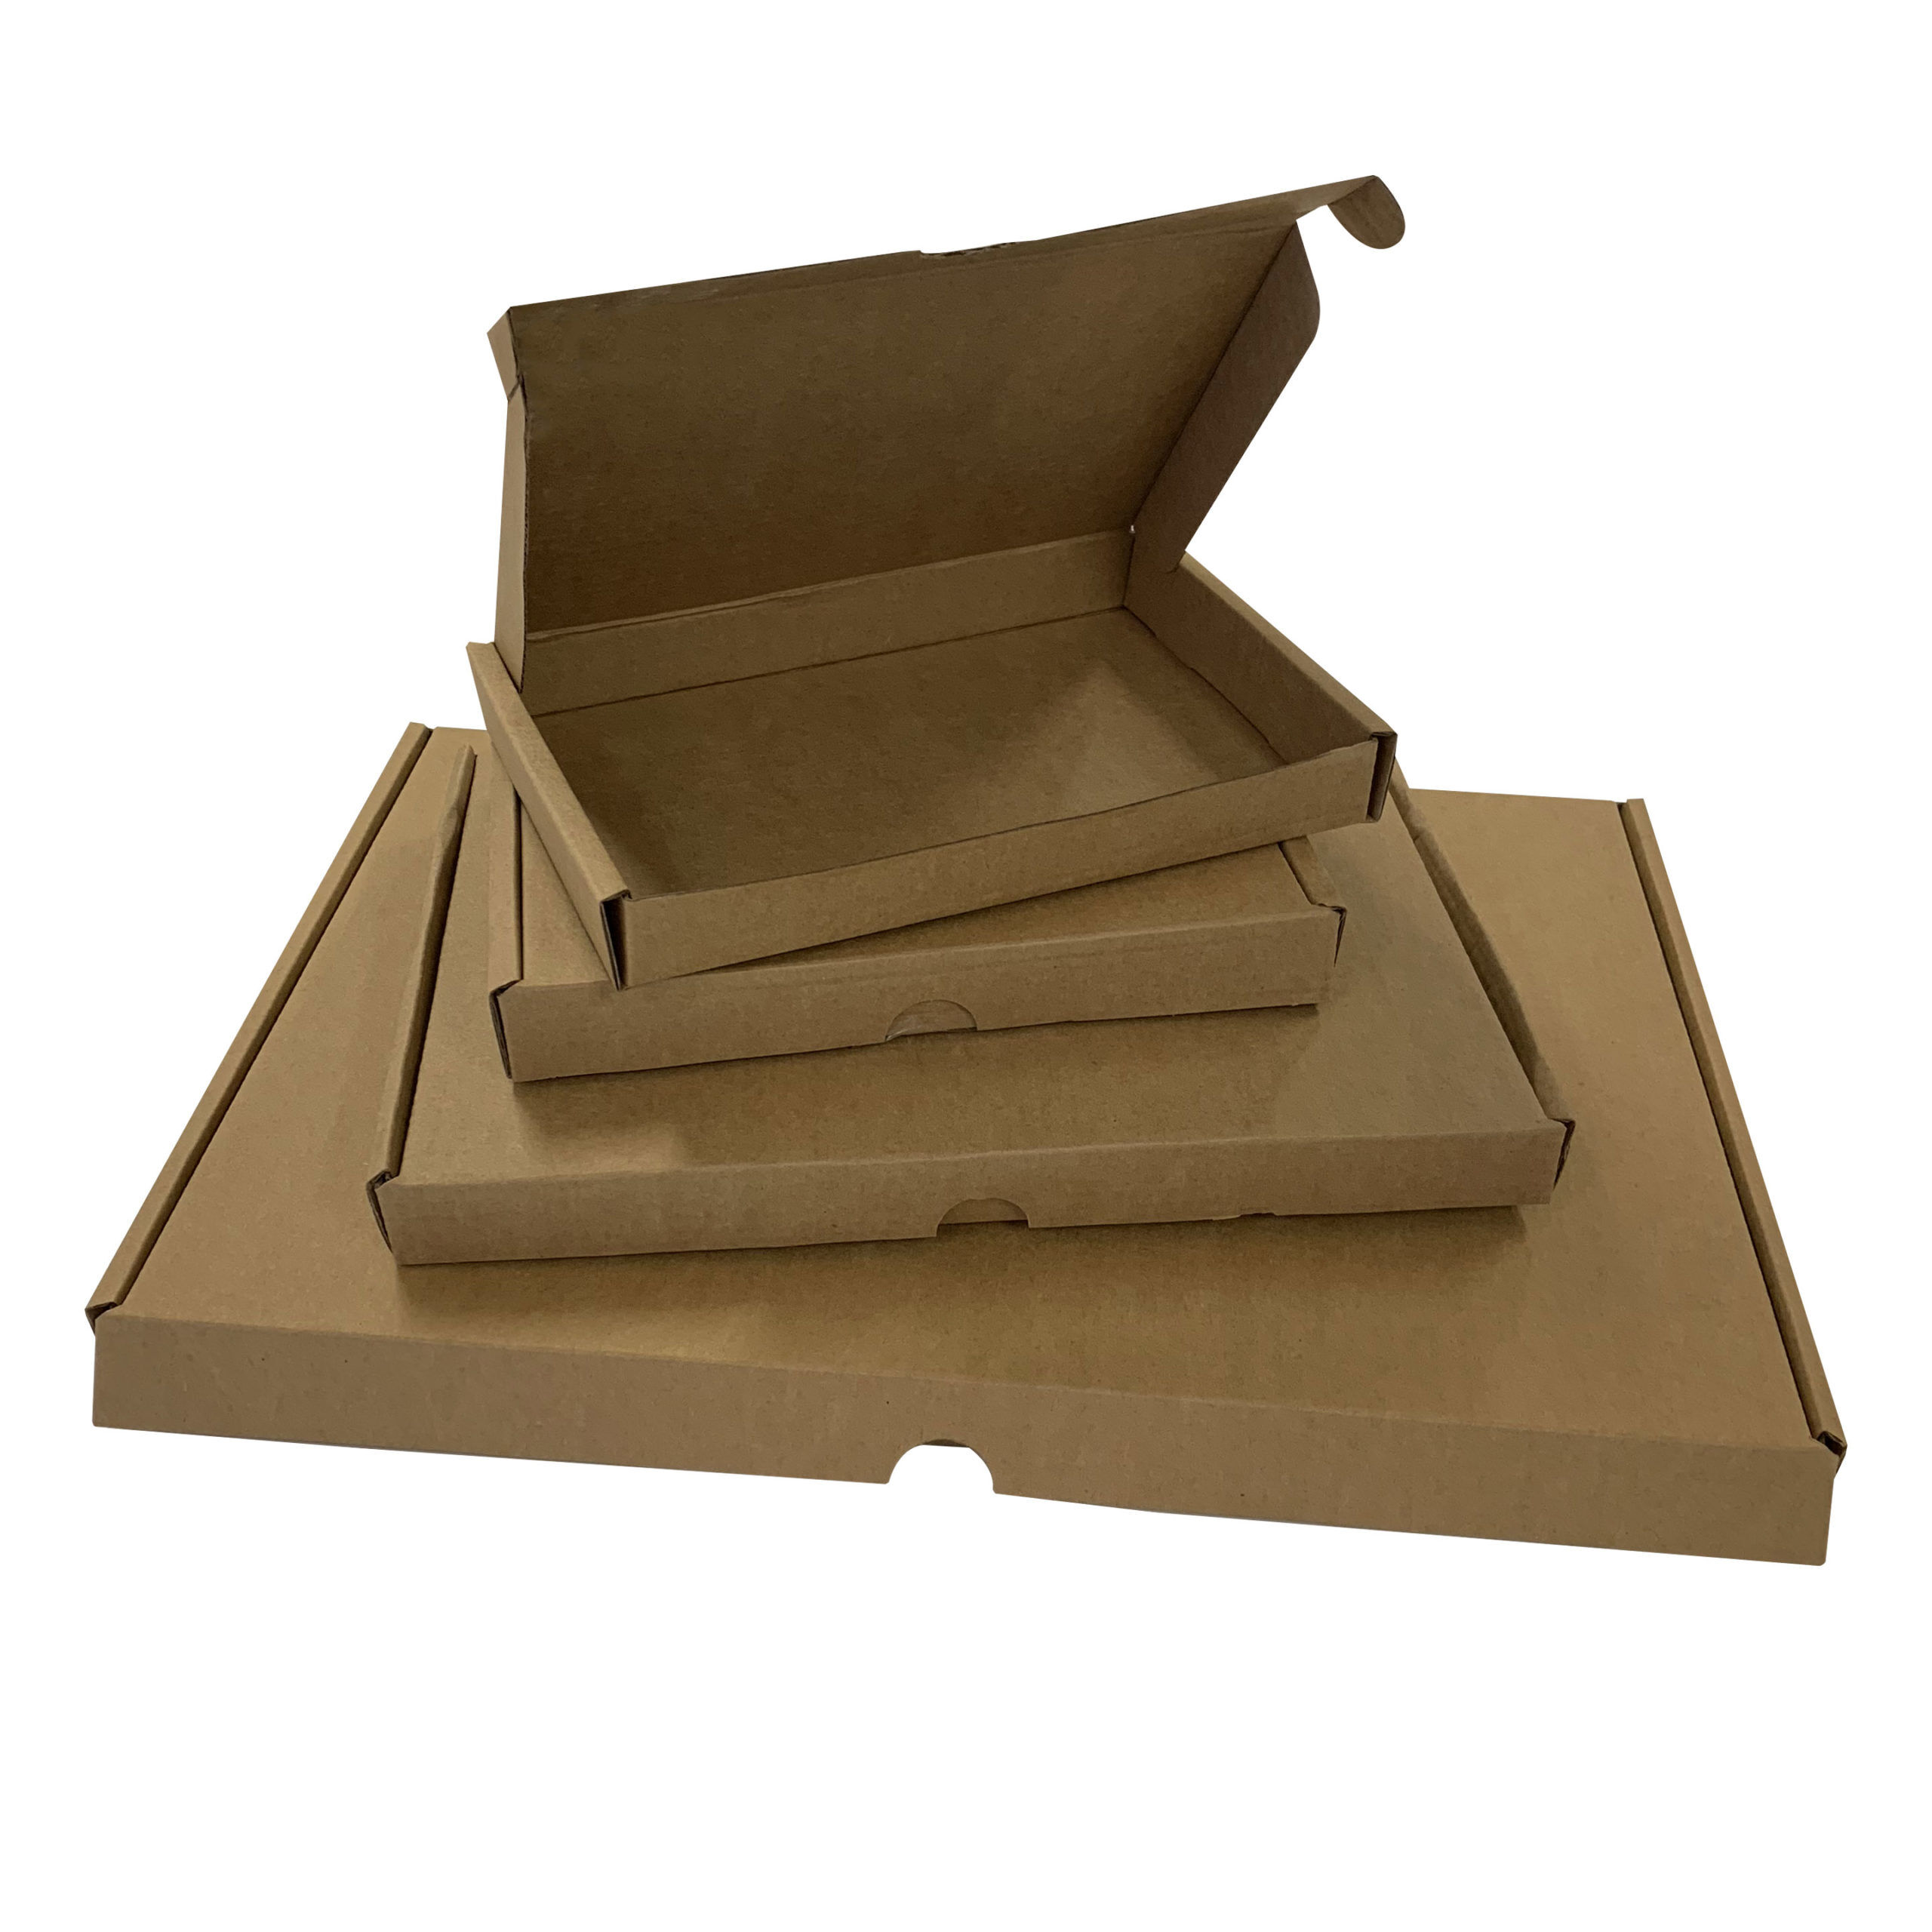 Large Letter Boxes Size C6 A6 Bulk Buy Strong and Easy to Pack for Royal Mail 